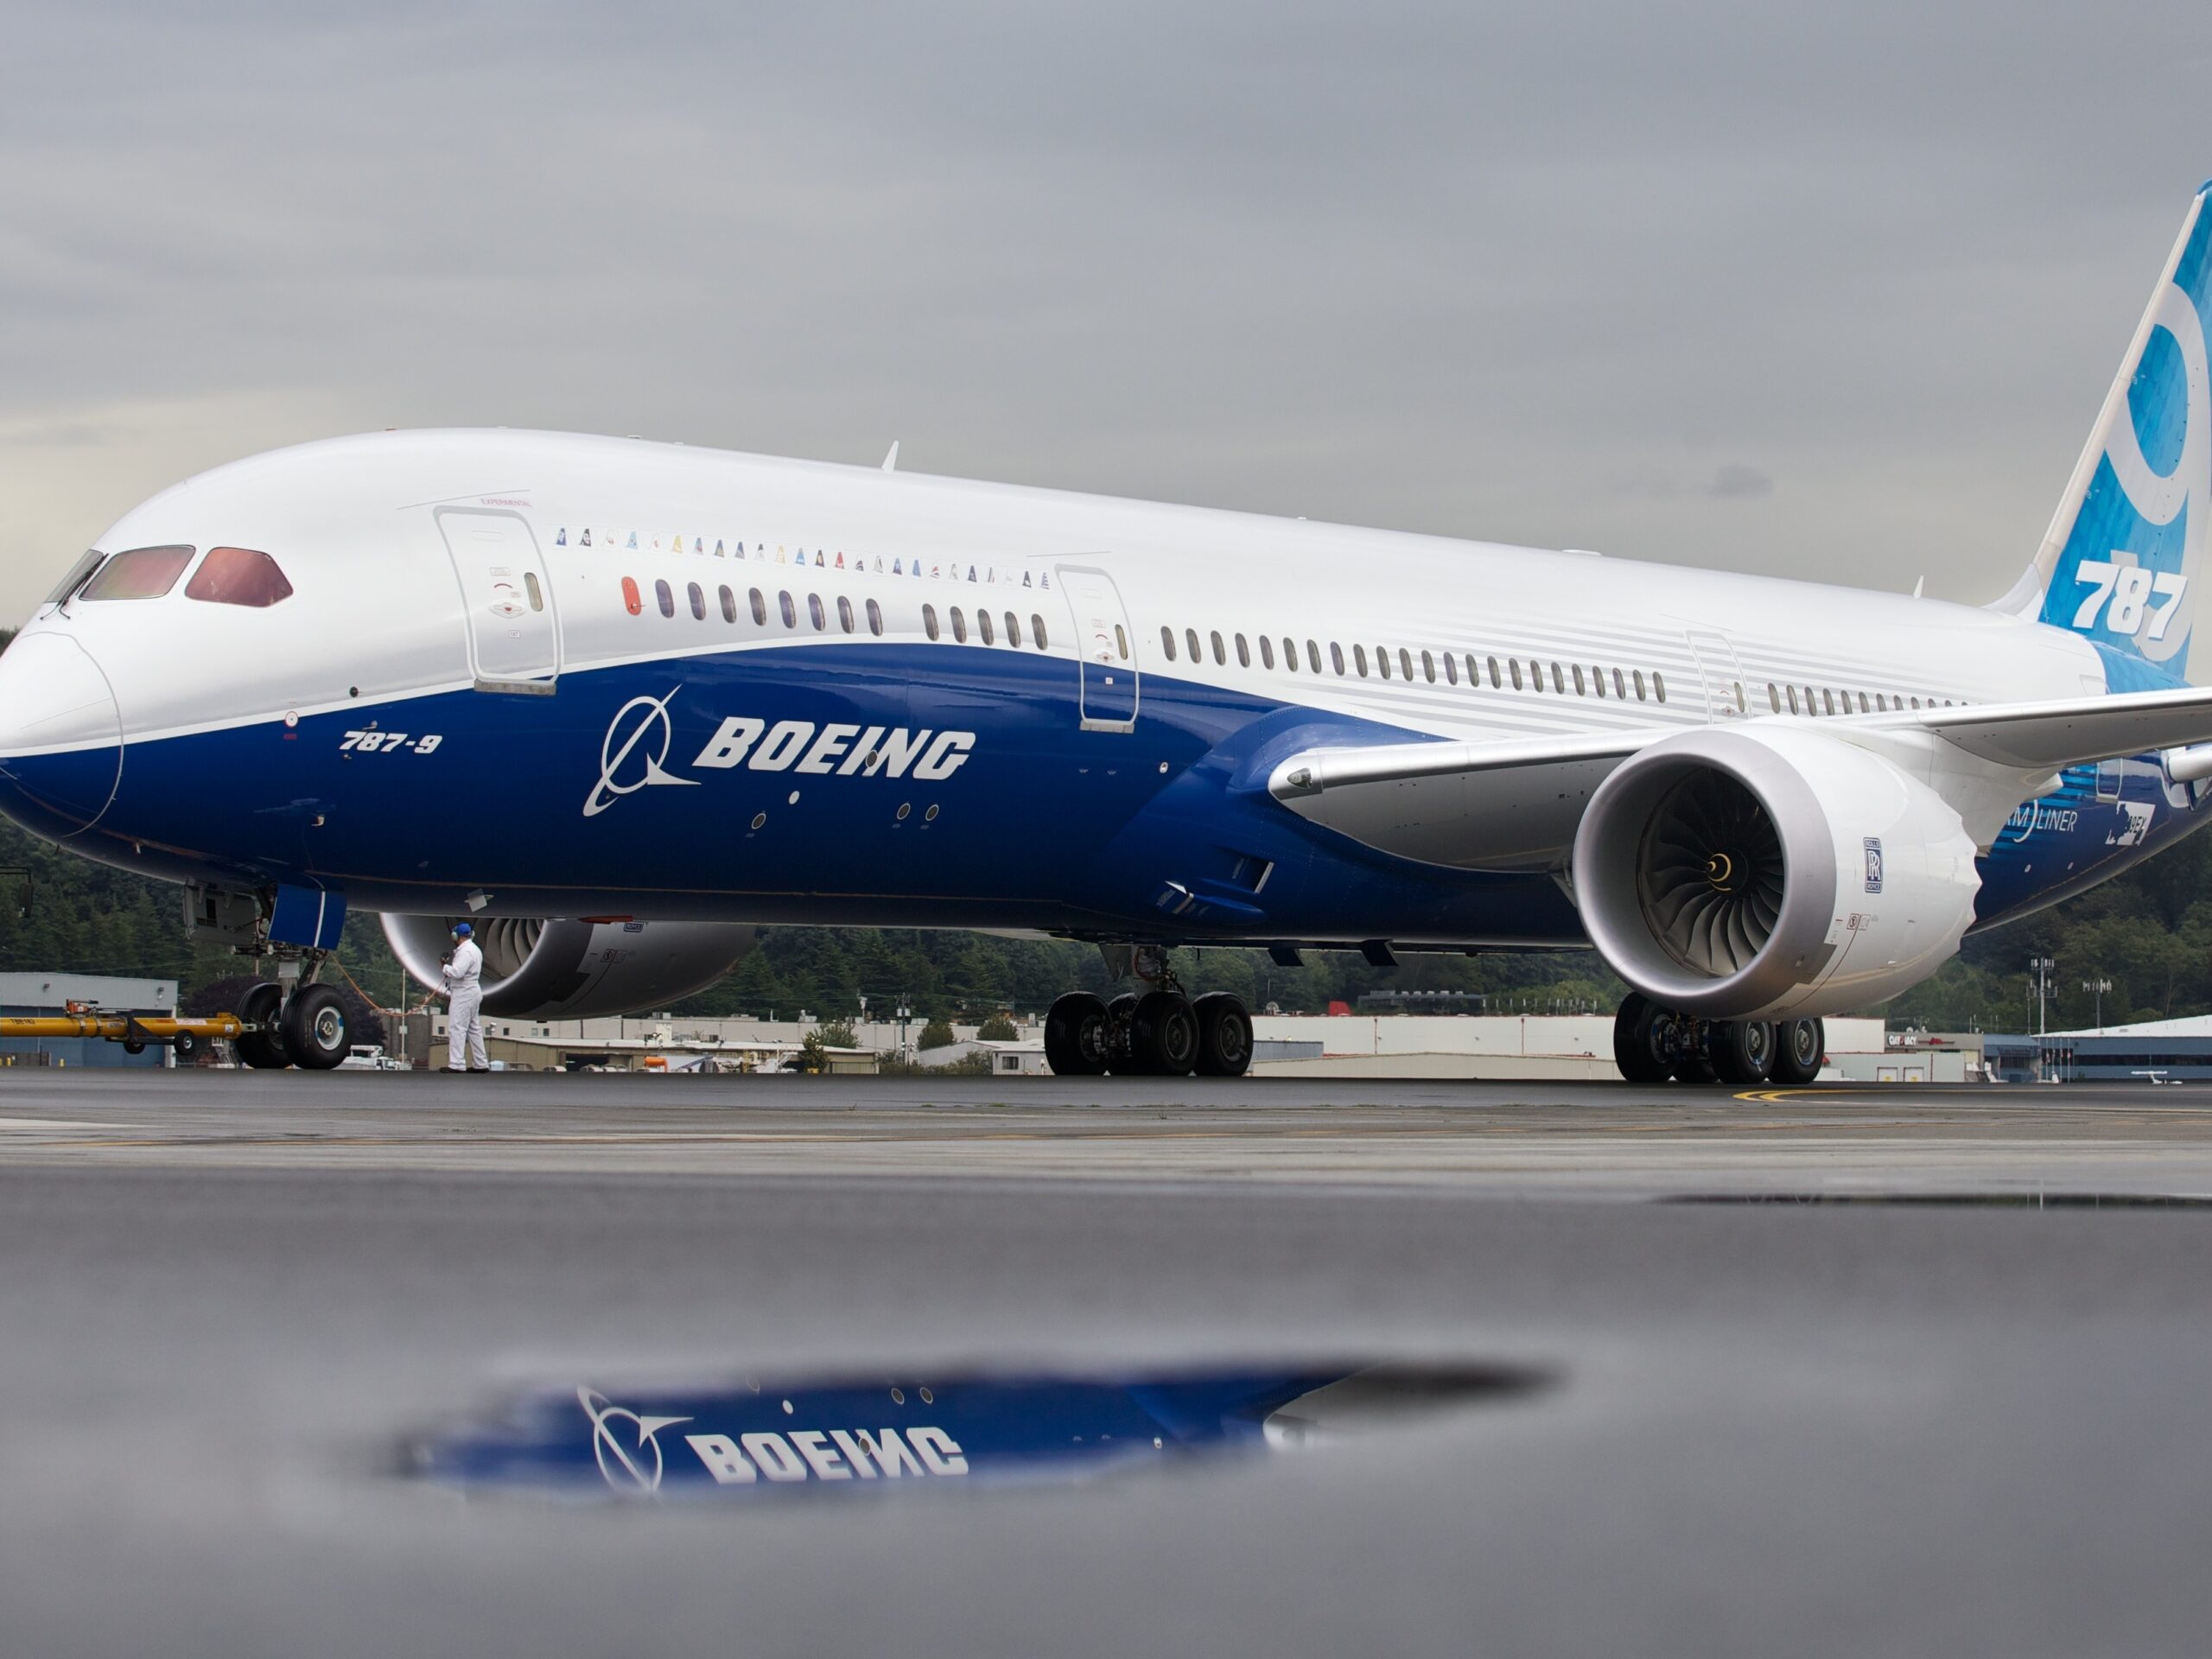 A Boeing 787-9 Dreamliner taxis at Boeing Field in Seattle, Washington.